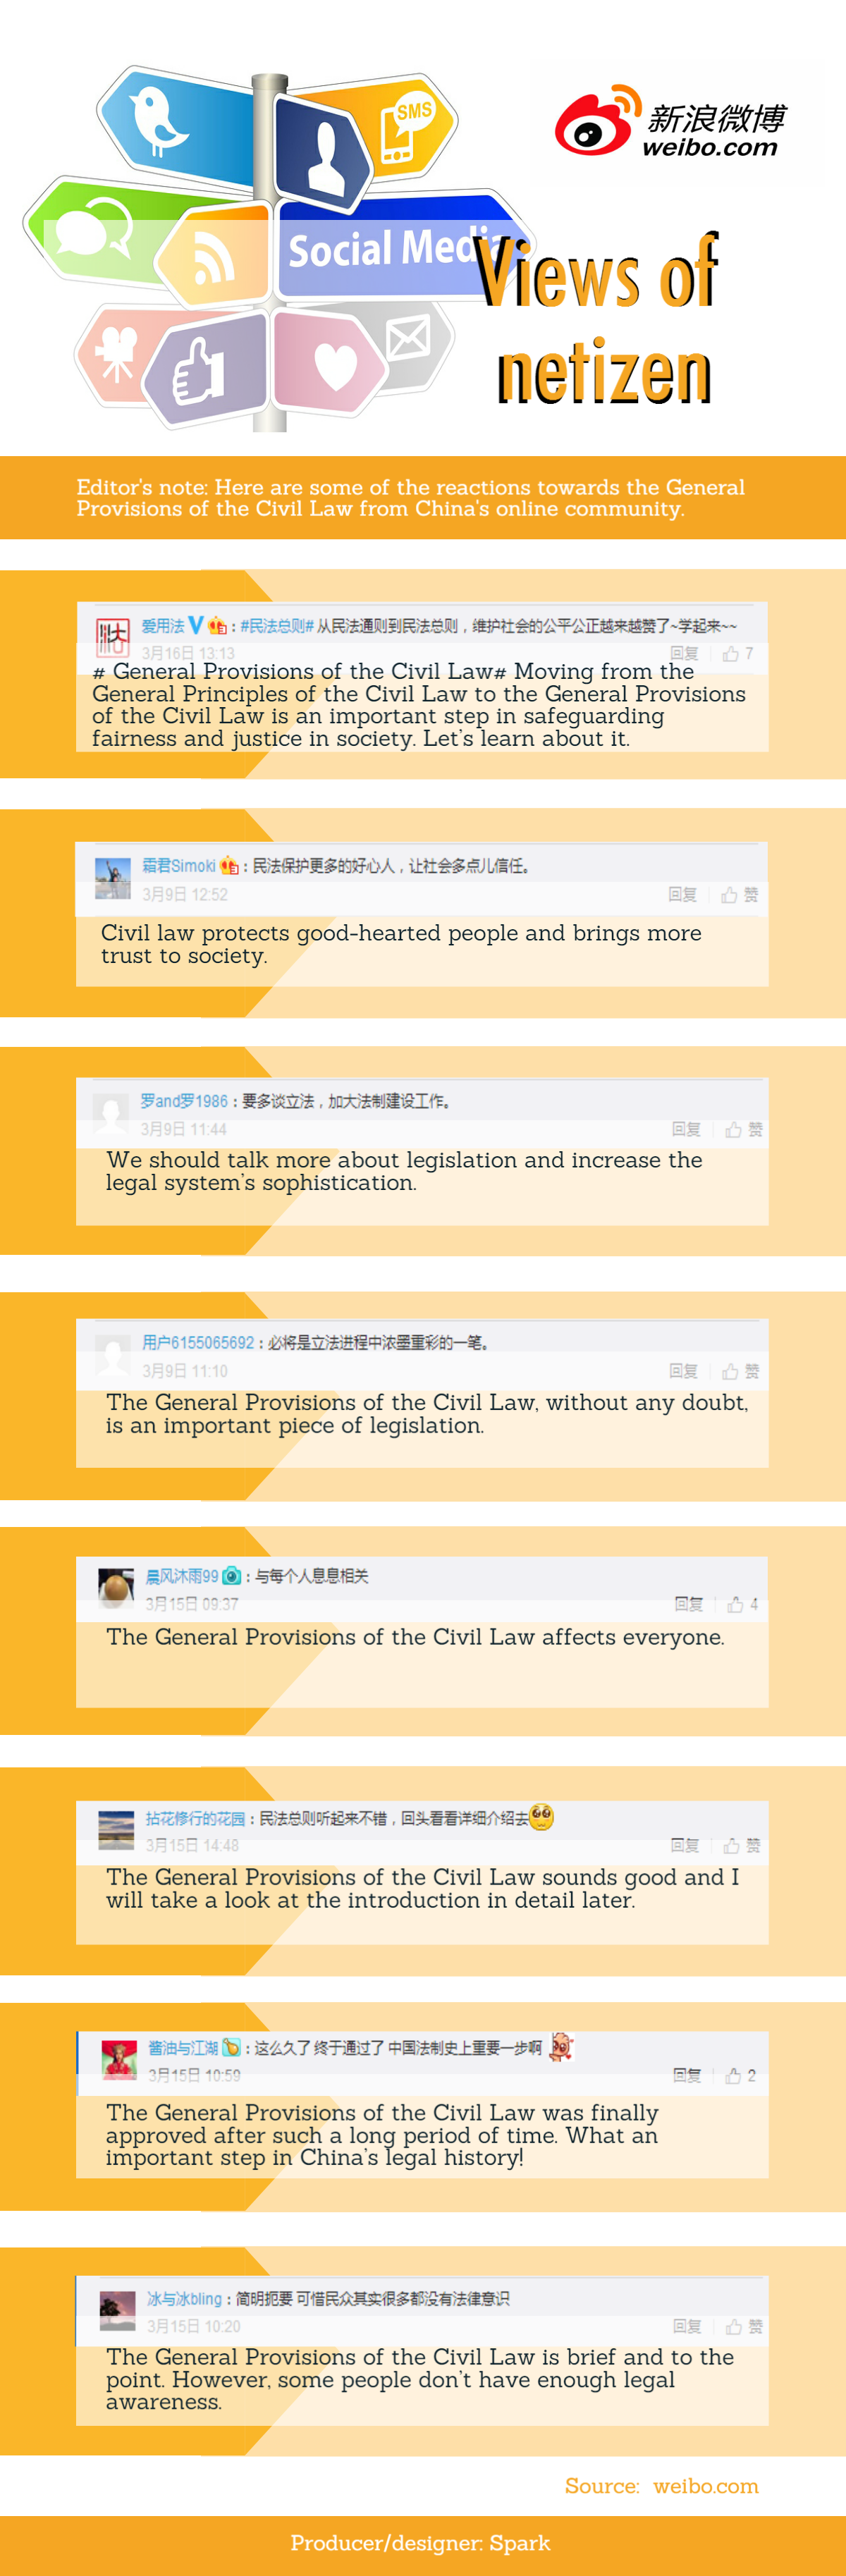 View of netizen: General Provisions of Civil Law